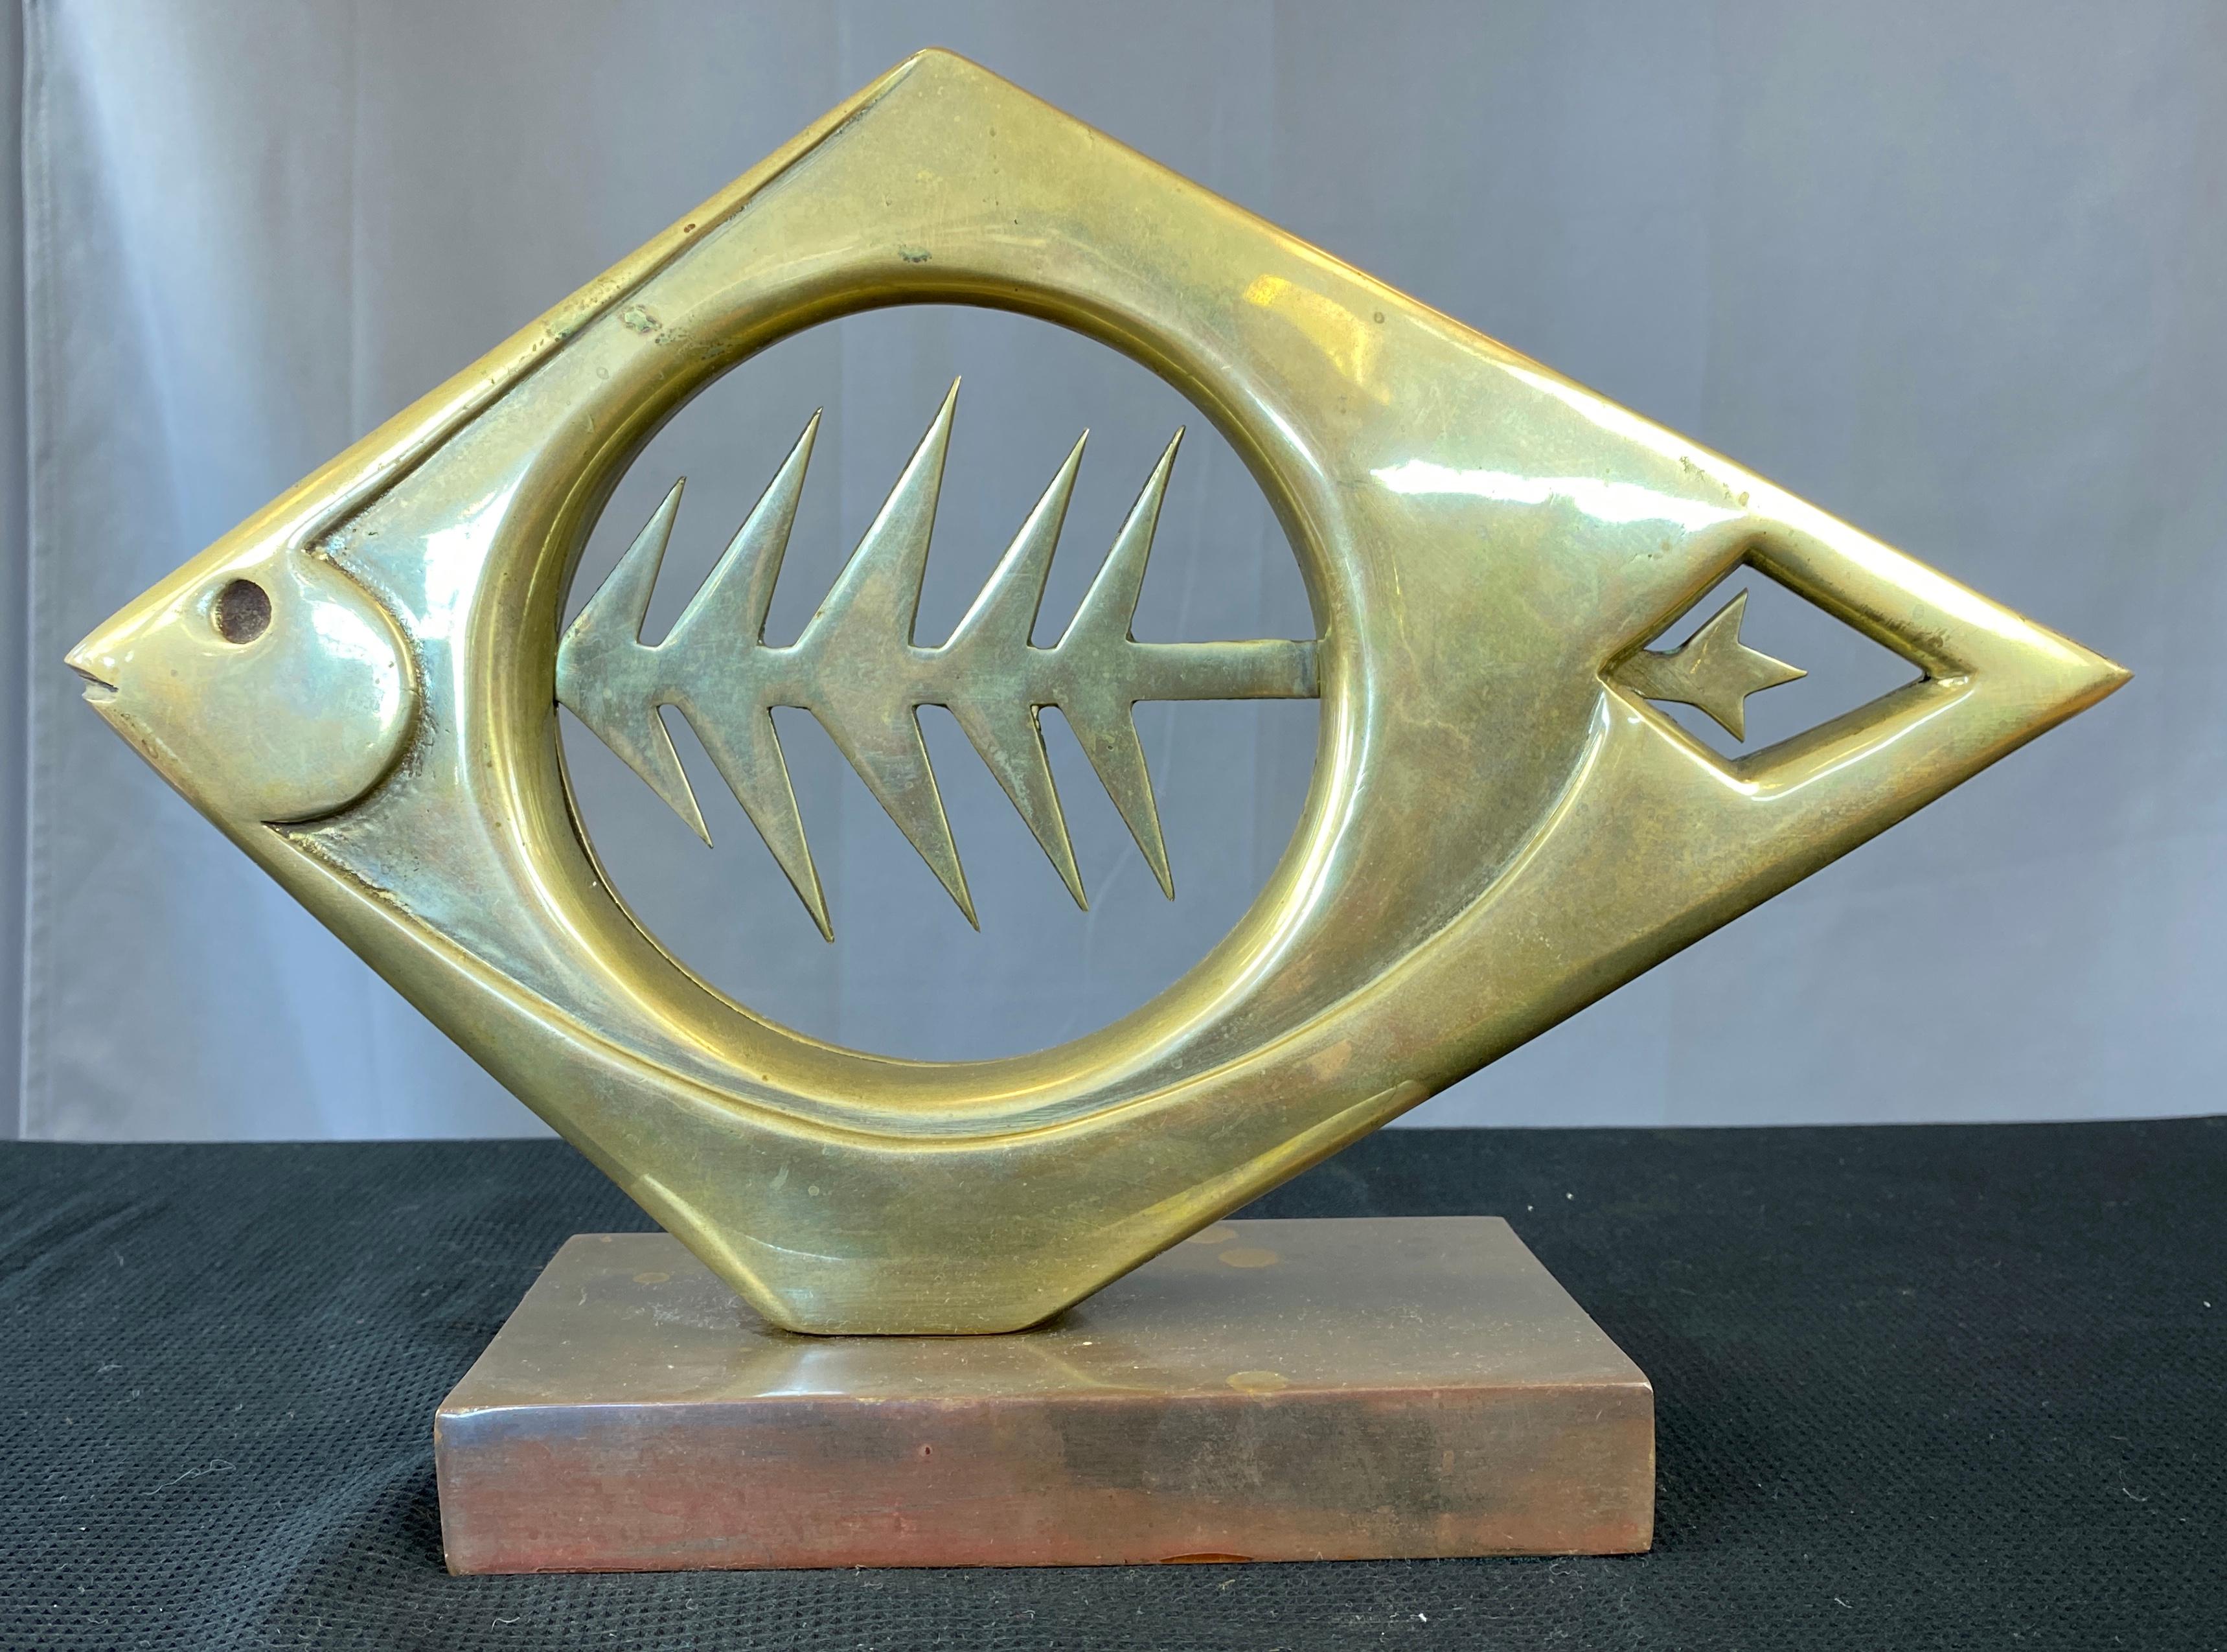 Brutalist abstract brass fish by Dolbi Cashier, circa 1980s. Dolbi Cashier was trade name of gallery house.
It sit's on a hollow weighted brass base, fish has a round cutout to show it's jagged spine.

Fish measurements are 14.25in x 2.74 x 8.88